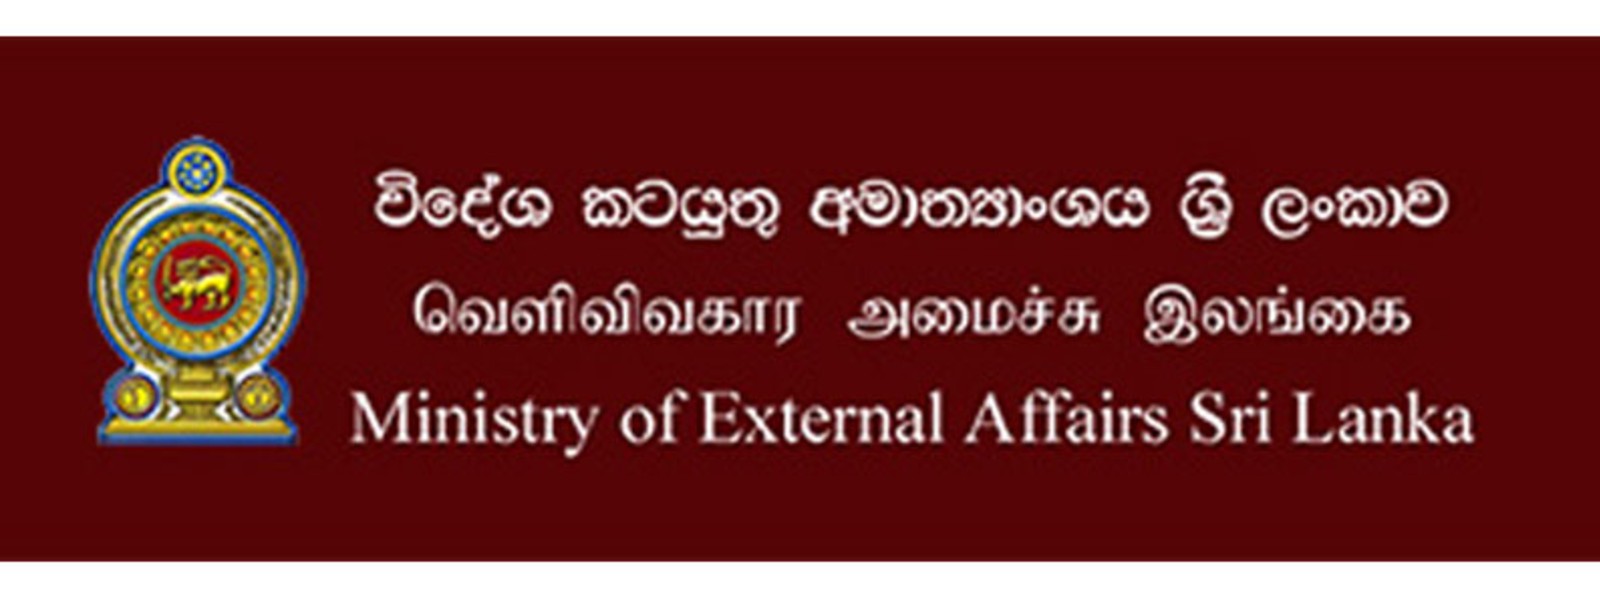 Consular Affairs at Sri Lanka’s MFA to provide services on appointments